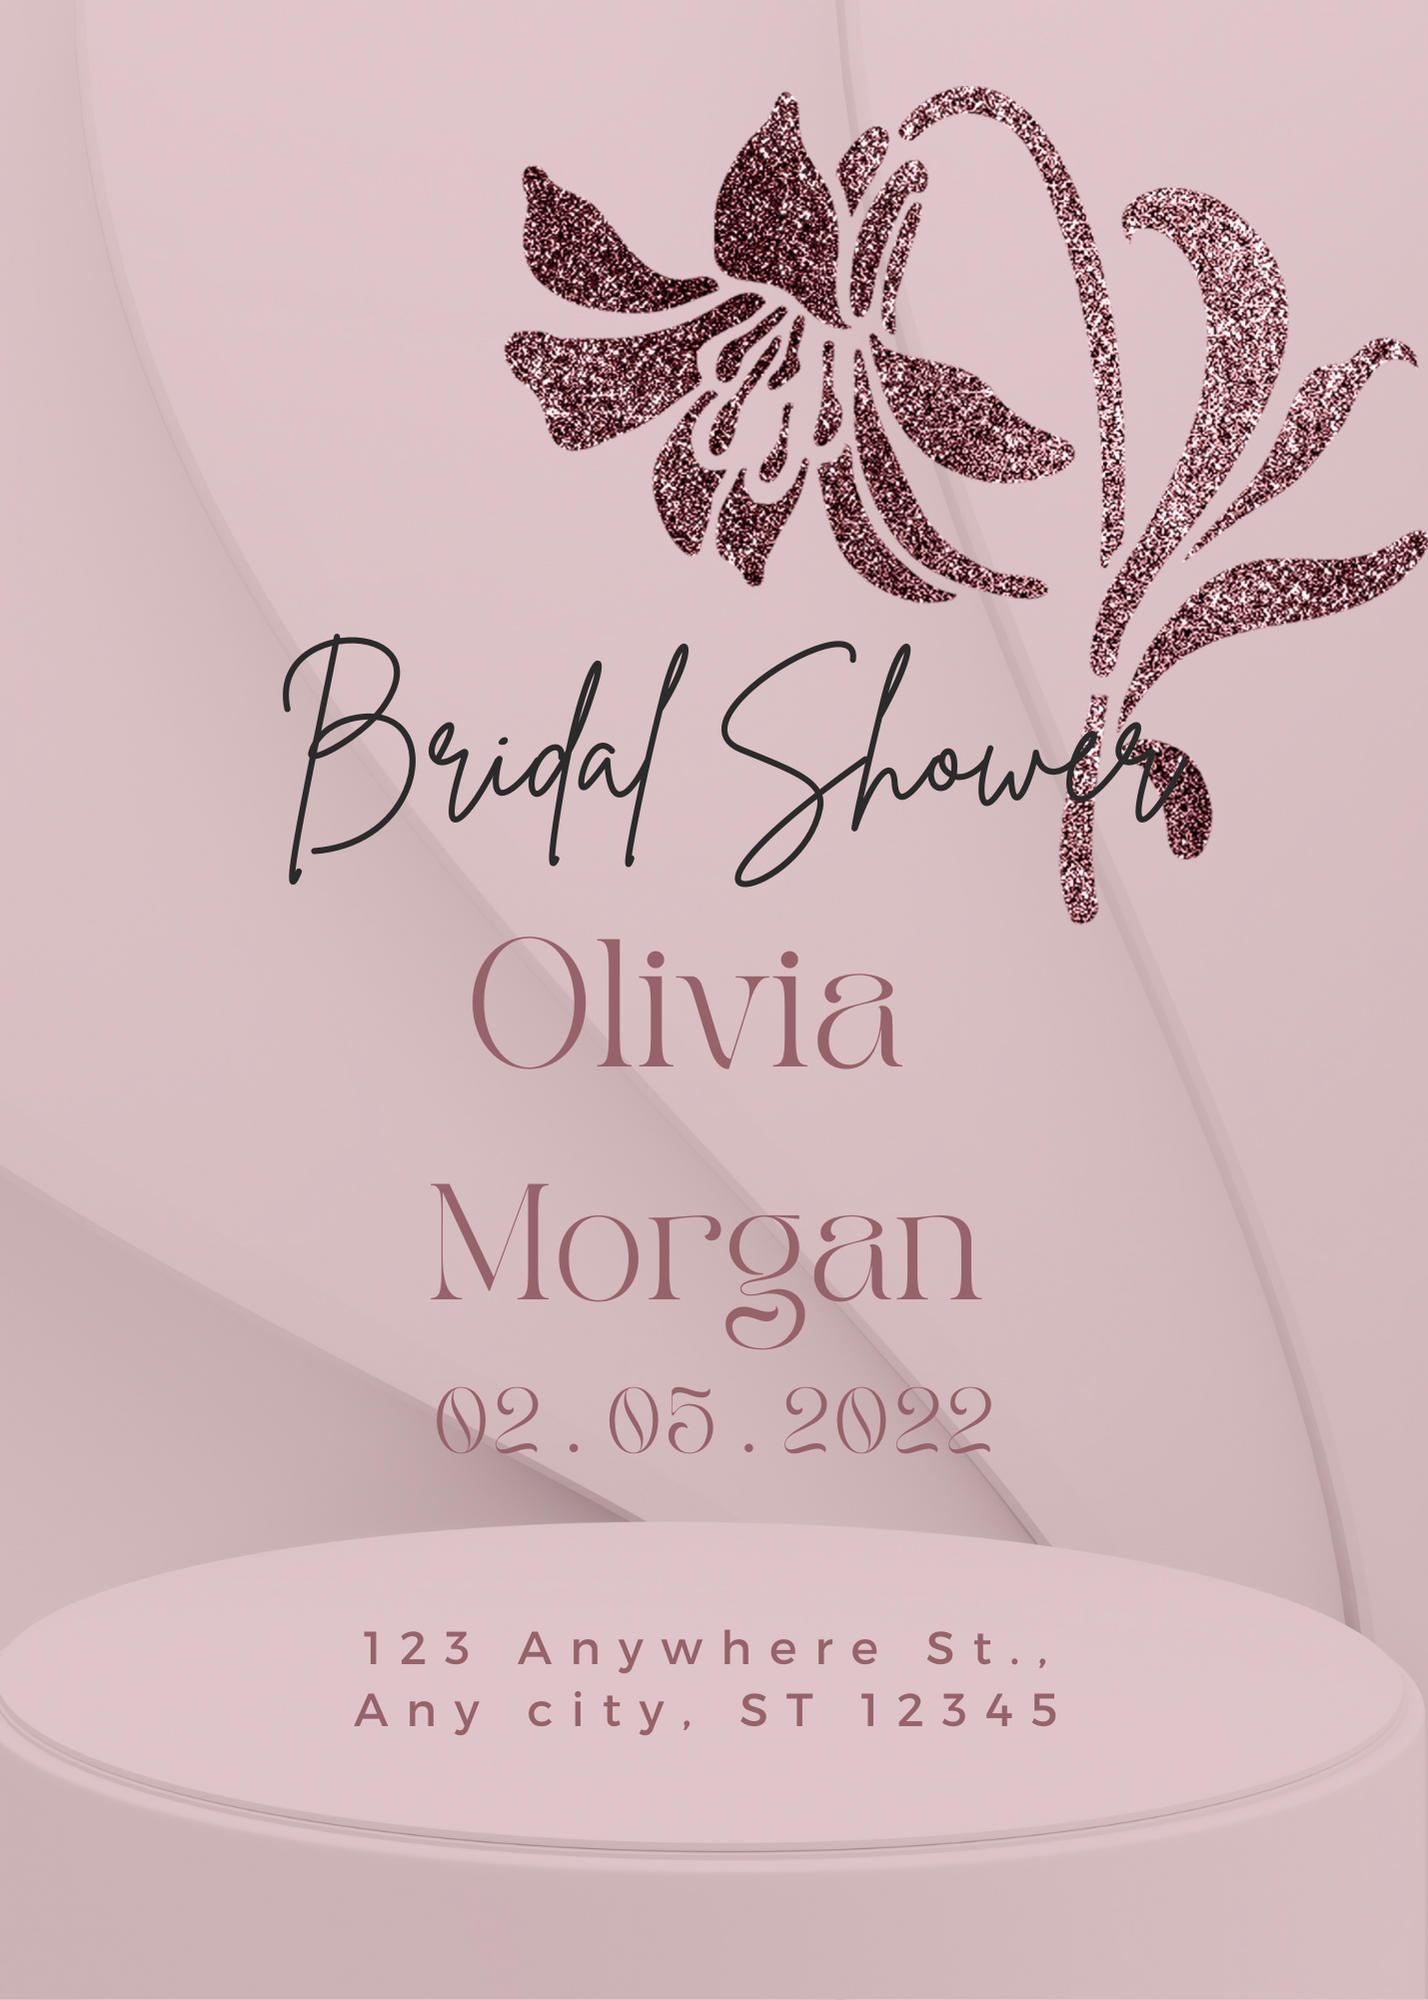 Wedding Invitation Card with Free Matching Bridal Shower and Bridesmaids Cards, Rose Pink Floral, Customisable Digital Download